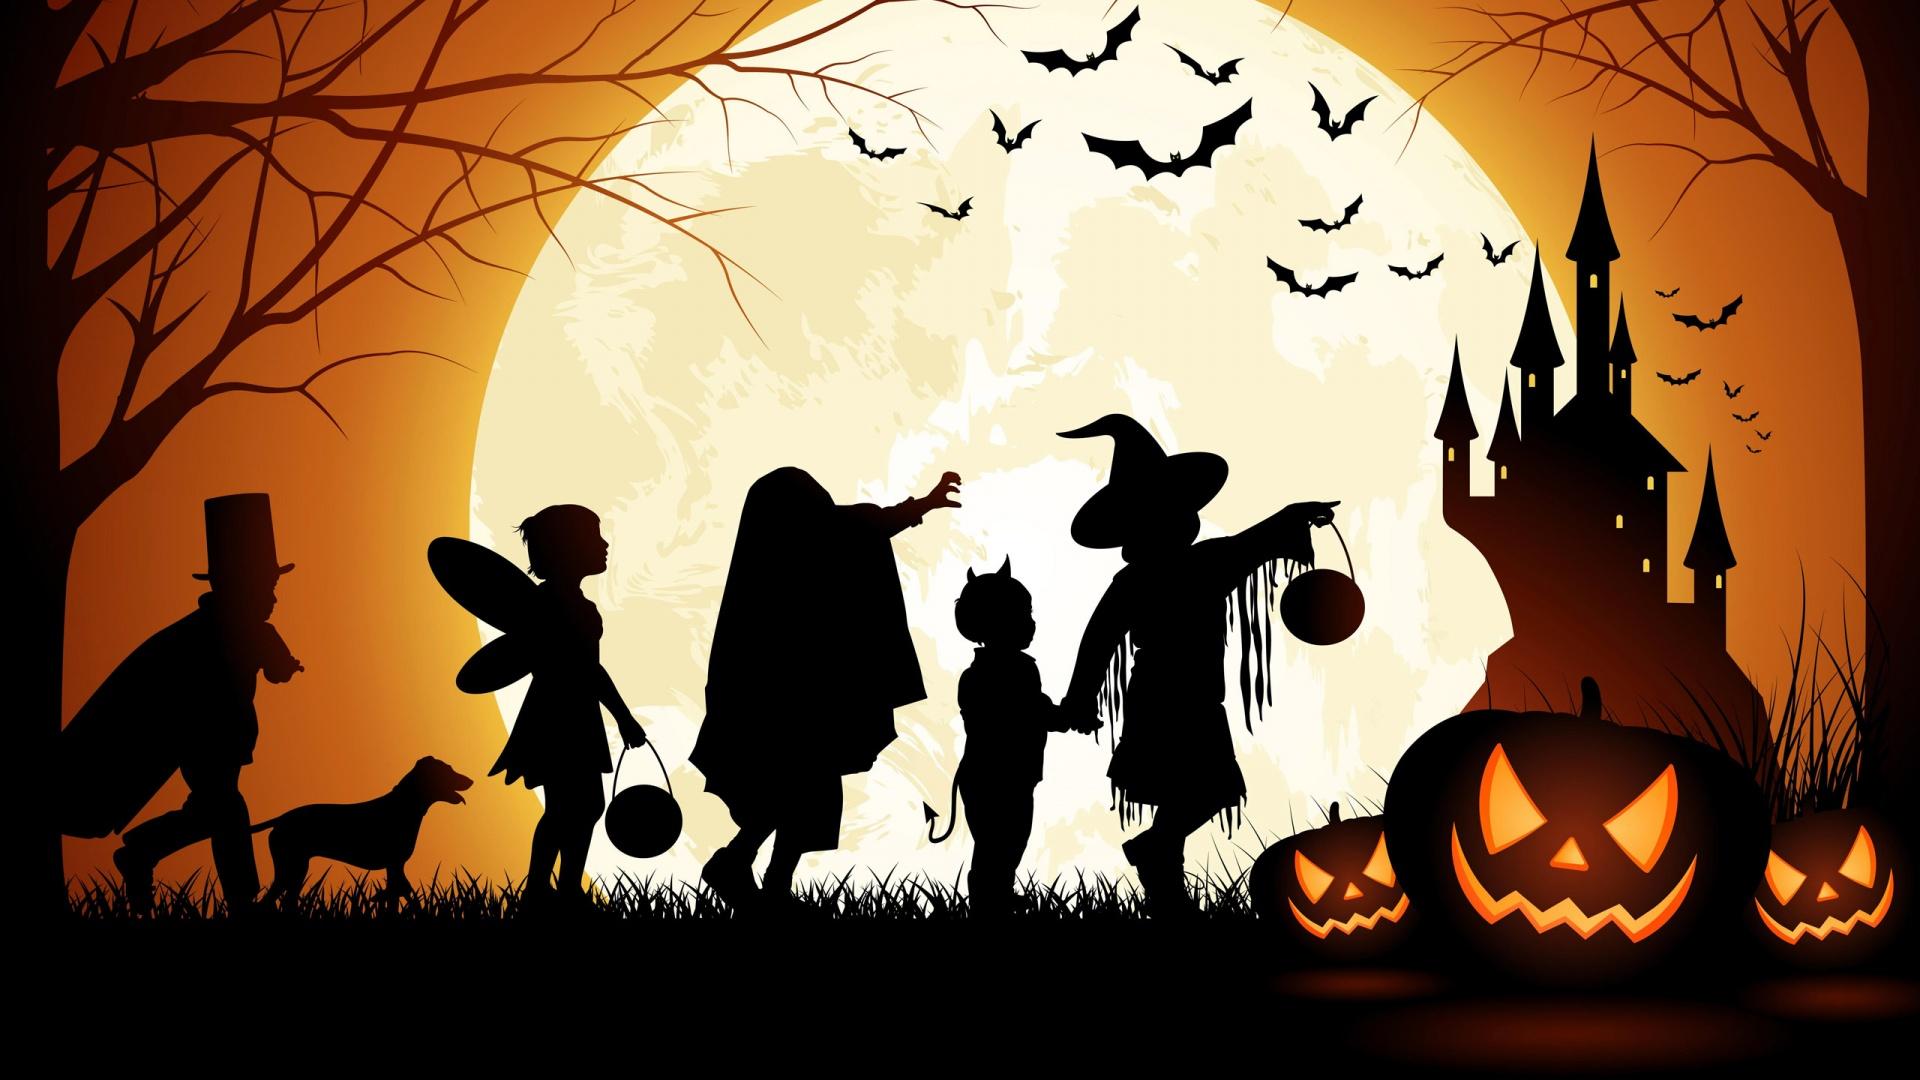 Halloween Silhouette Trick or Treating